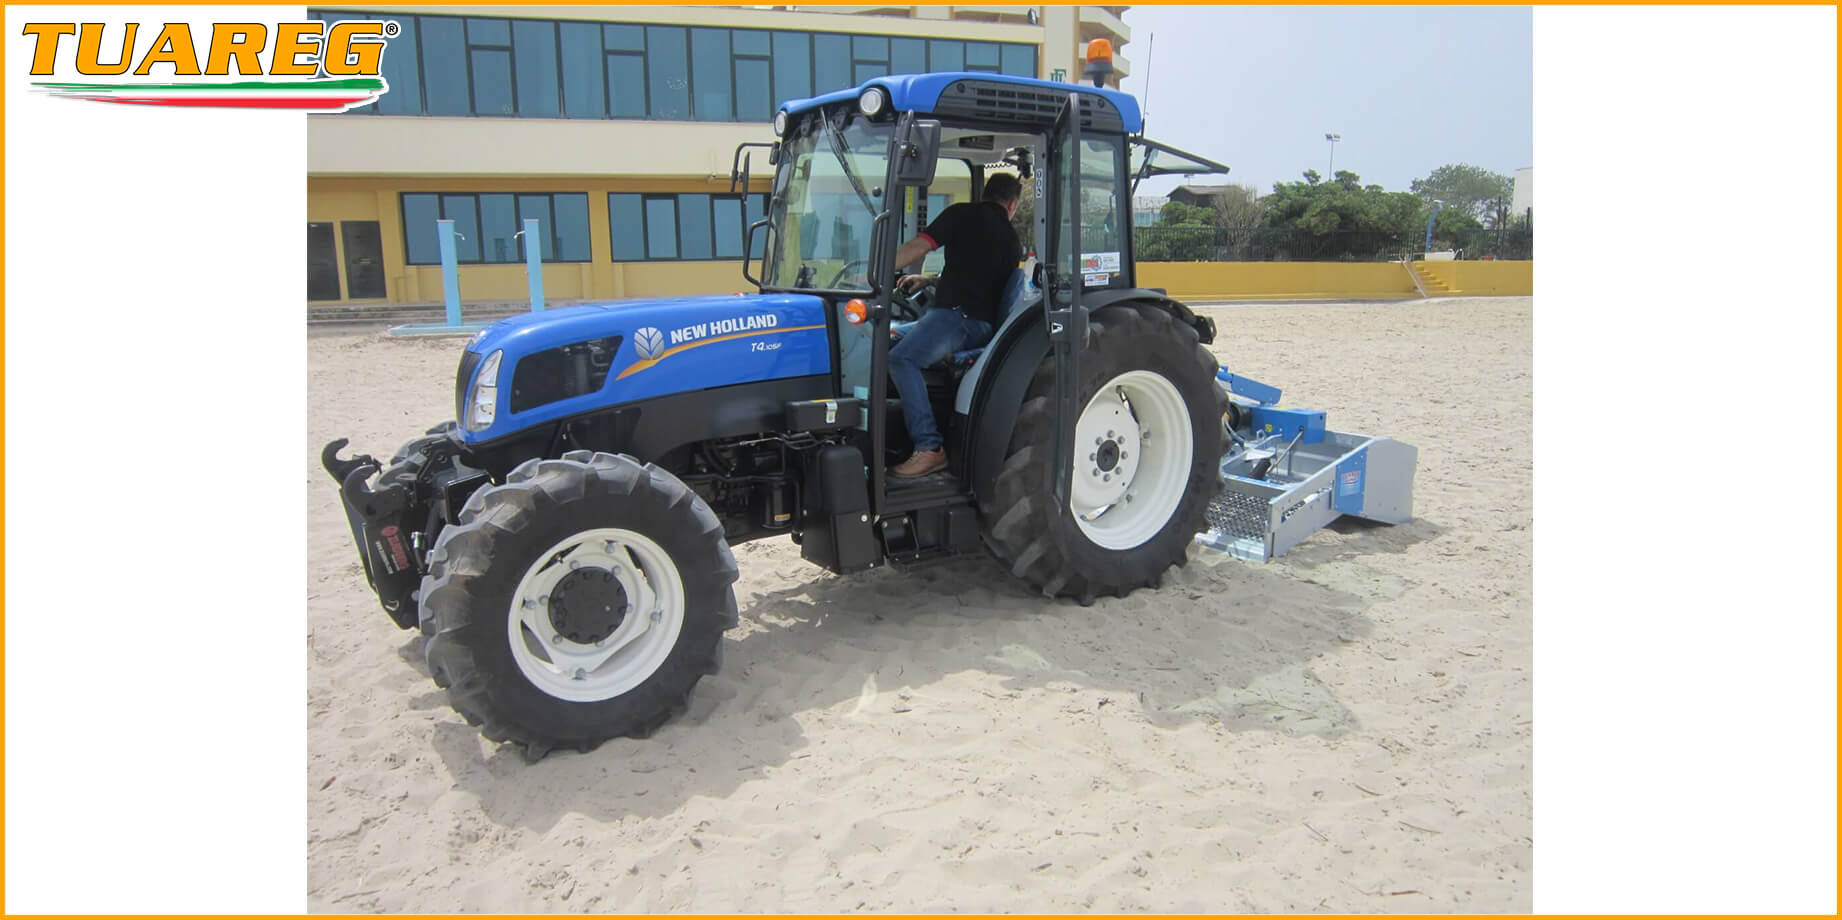 Tuareg EvoCombined - Beach Cleaning Machine - Attached to a Tractor